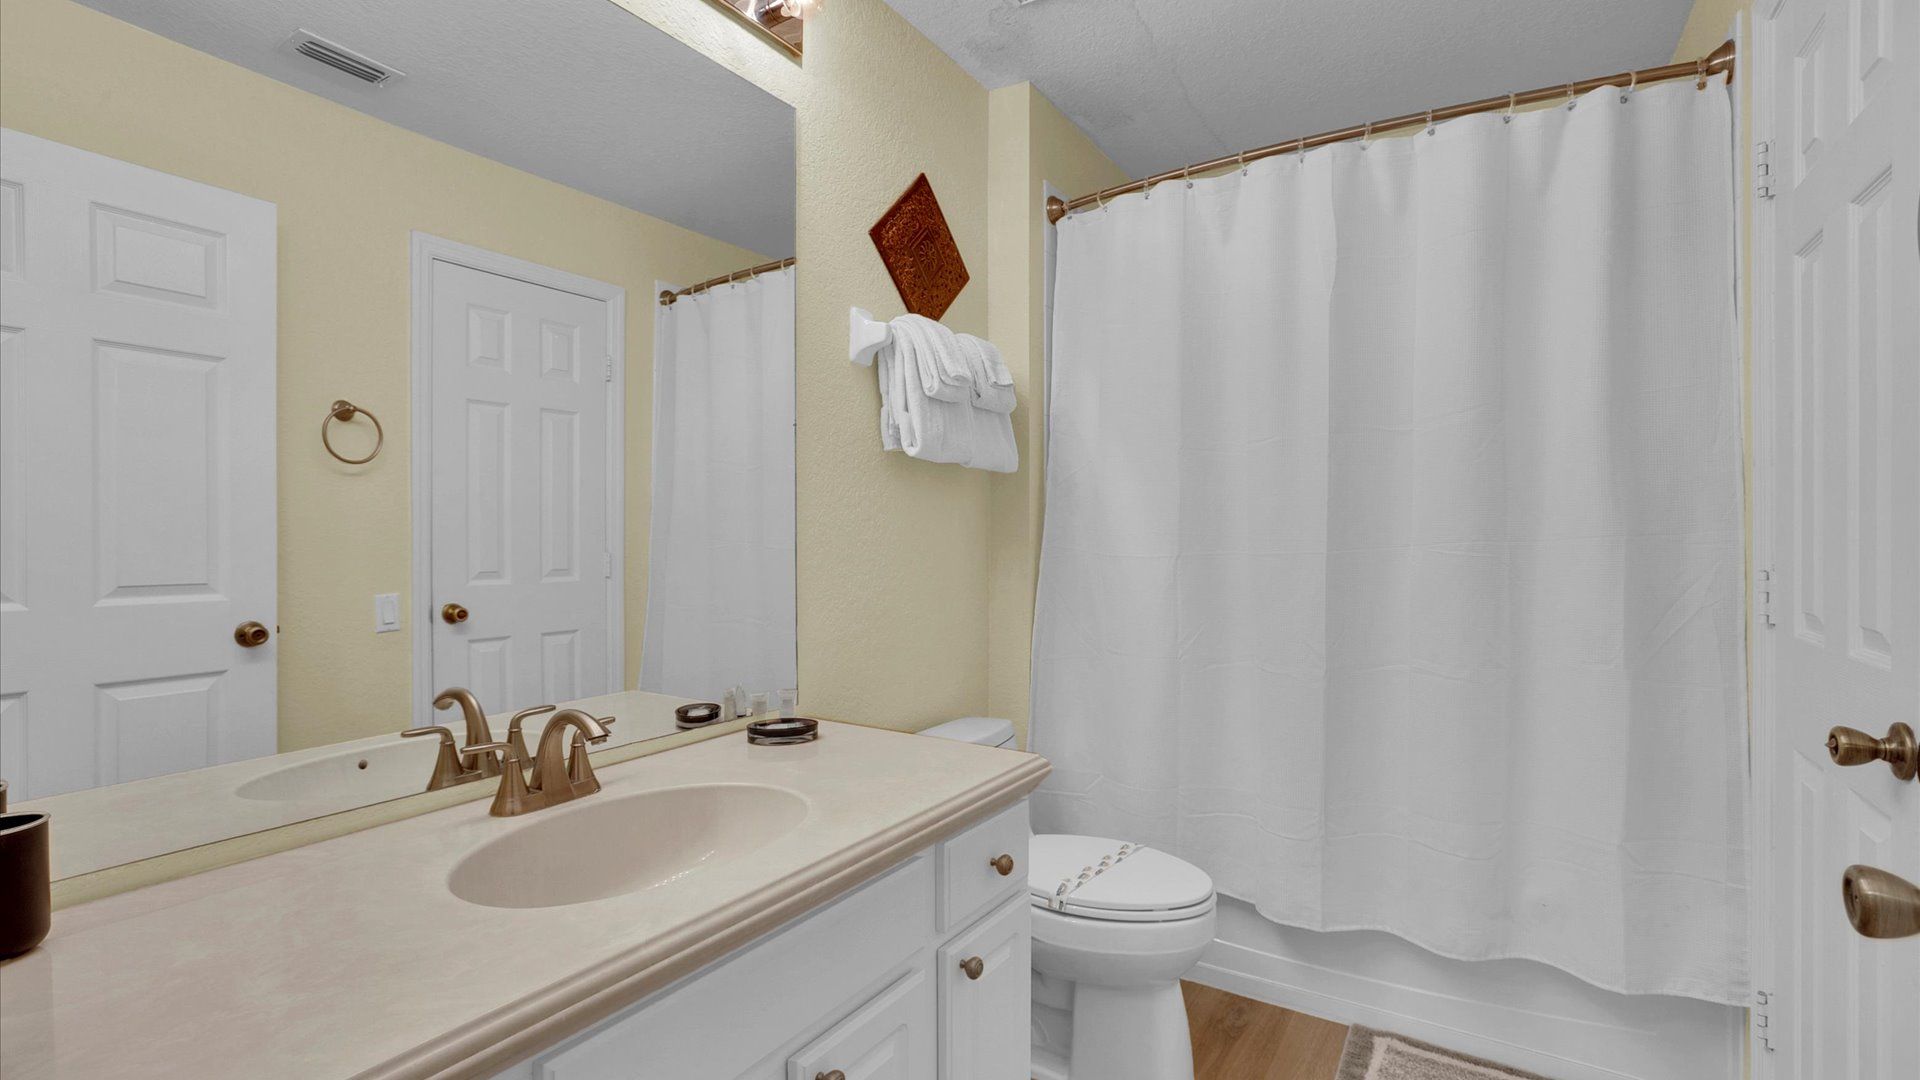 Two Twins Bathroom 3
Downstairs - Shared
Tub/Shower Combo